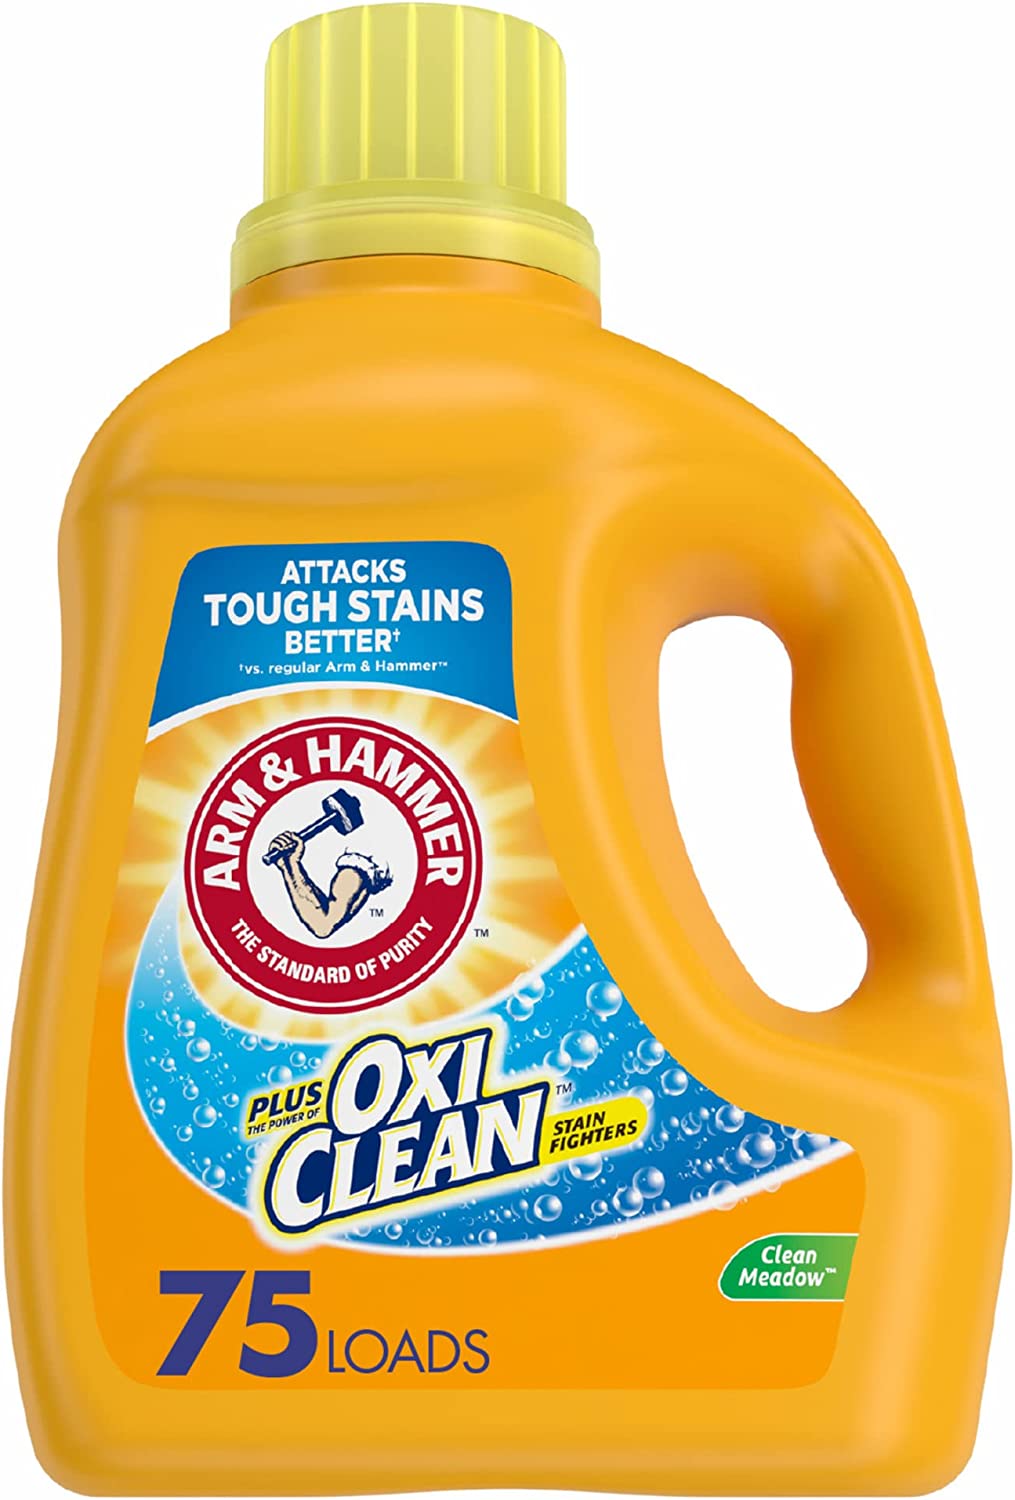 118.1-Oz Arm & Hammer Plus OxiClean Liquid Laundry Detergent (75-Loads, Clean Meadow) $5.21 w/ S&S + Free S&H w/ Prime or $25+